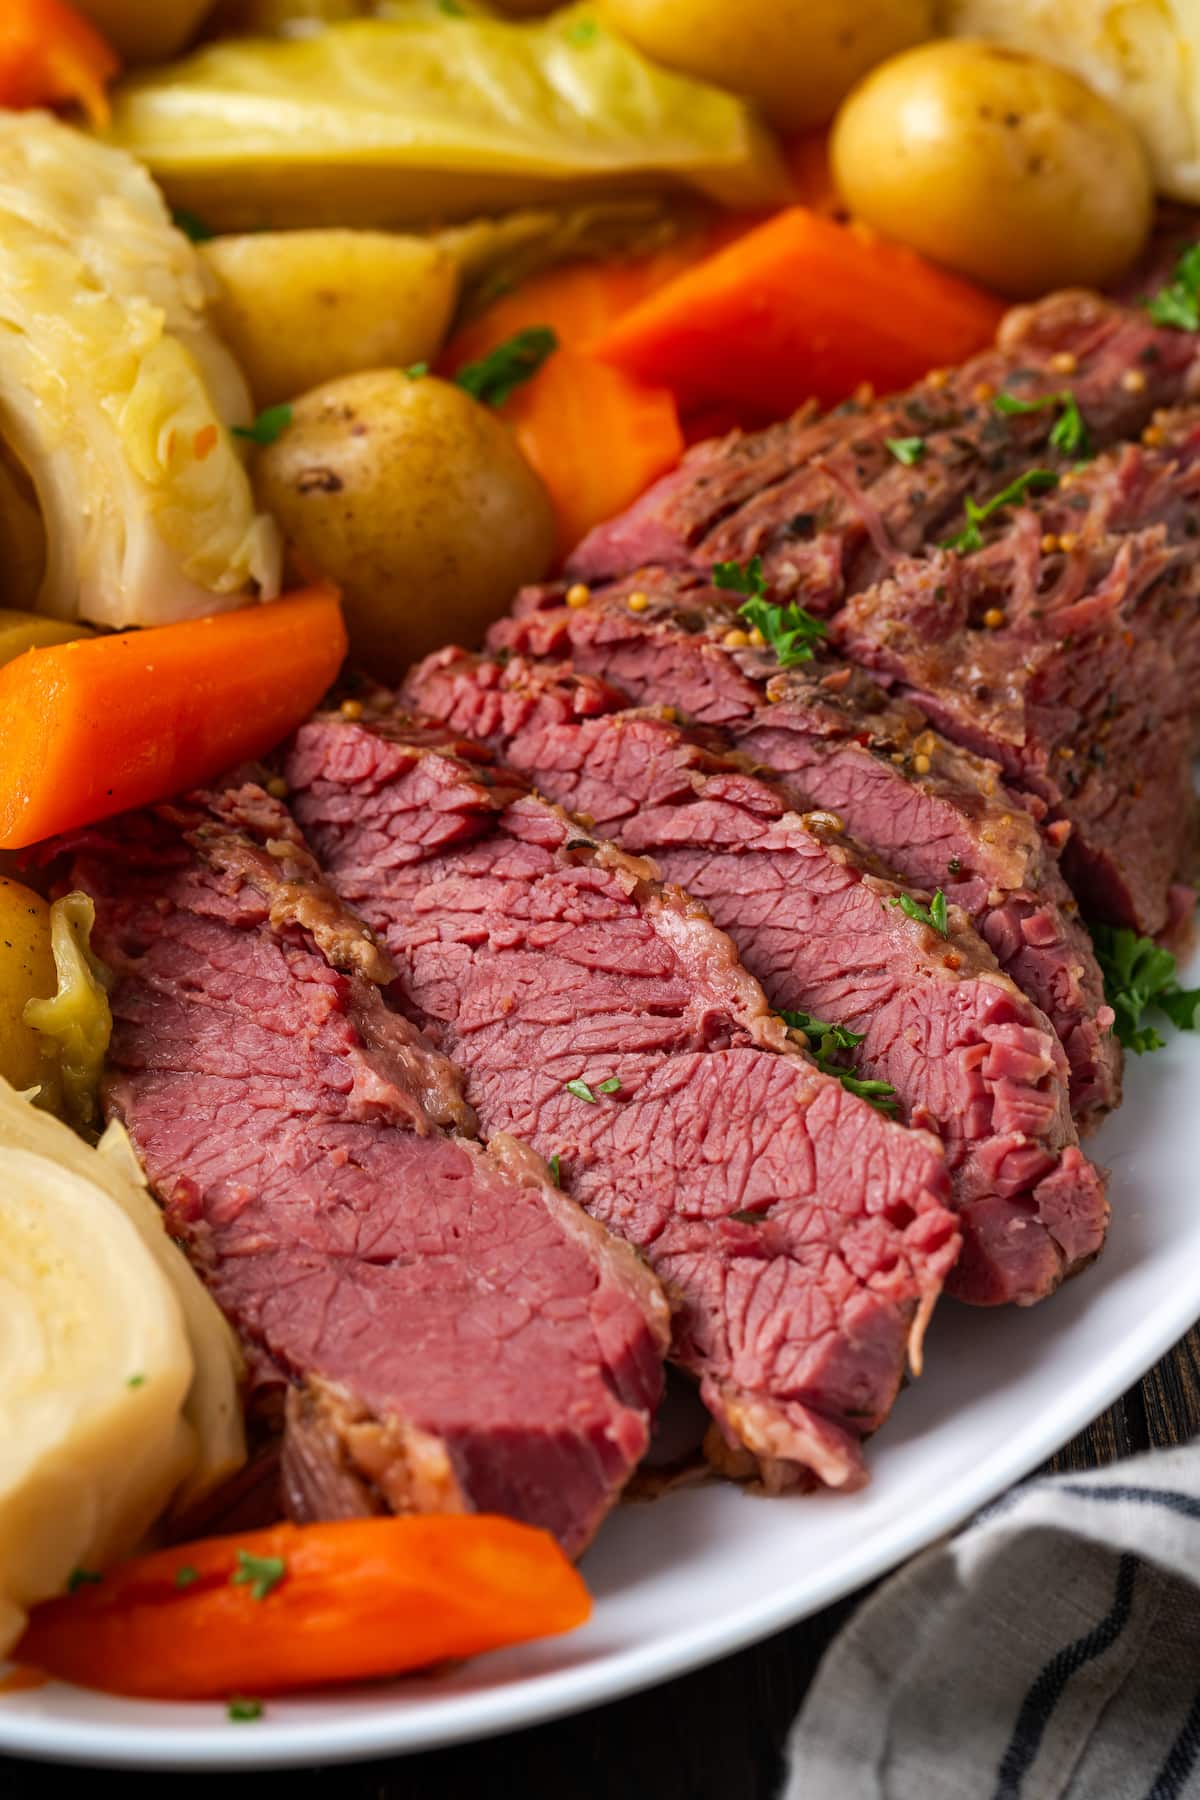 Sliced corned beef on a plate next to cabbage, potatoes, and carrots.